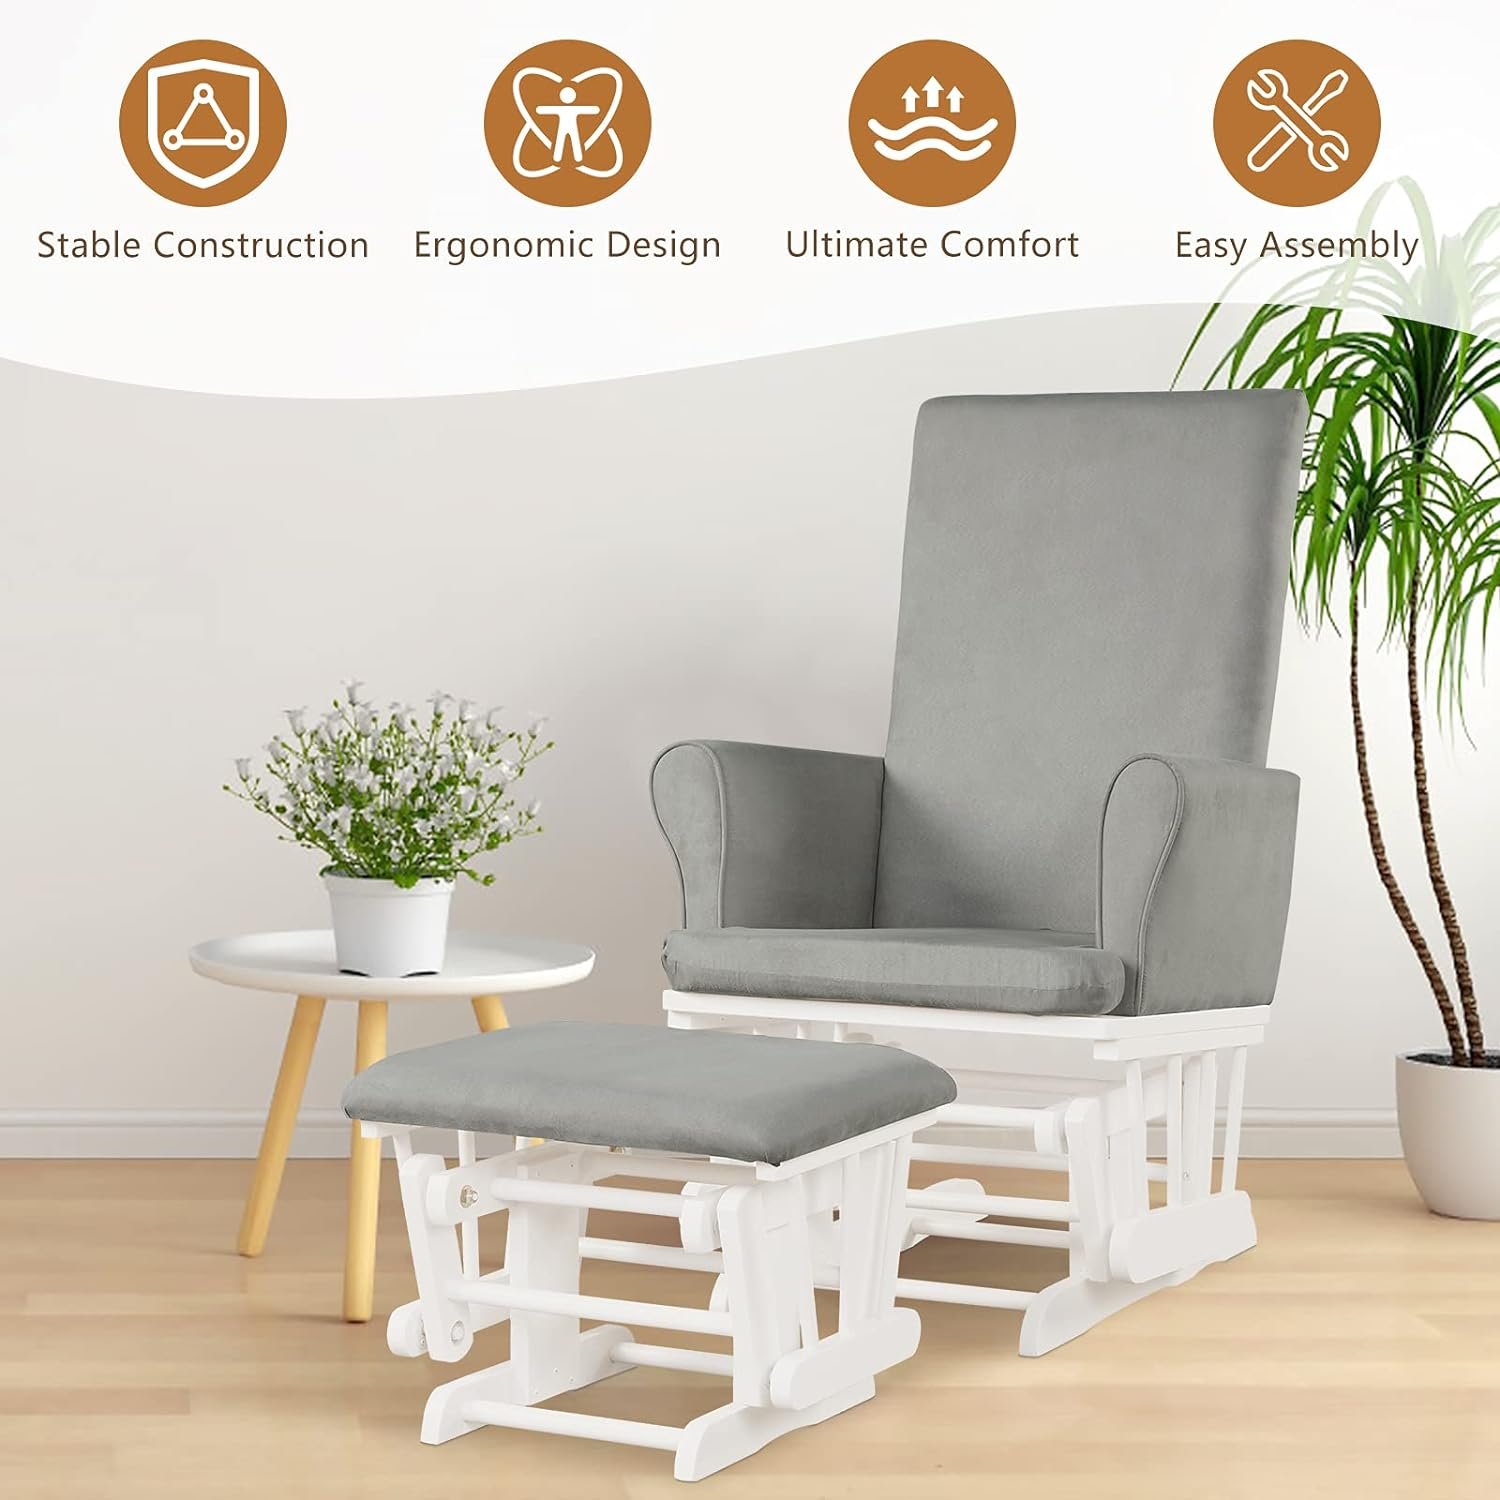 Costzon Glider and Ottoman Set, Wood Baby Rocker Nursery Furniture for Napping Reading Nursing, Cleanable Upholstered Comfort Rocking Nursery Chair with Detachable Cushion (Light Gray)